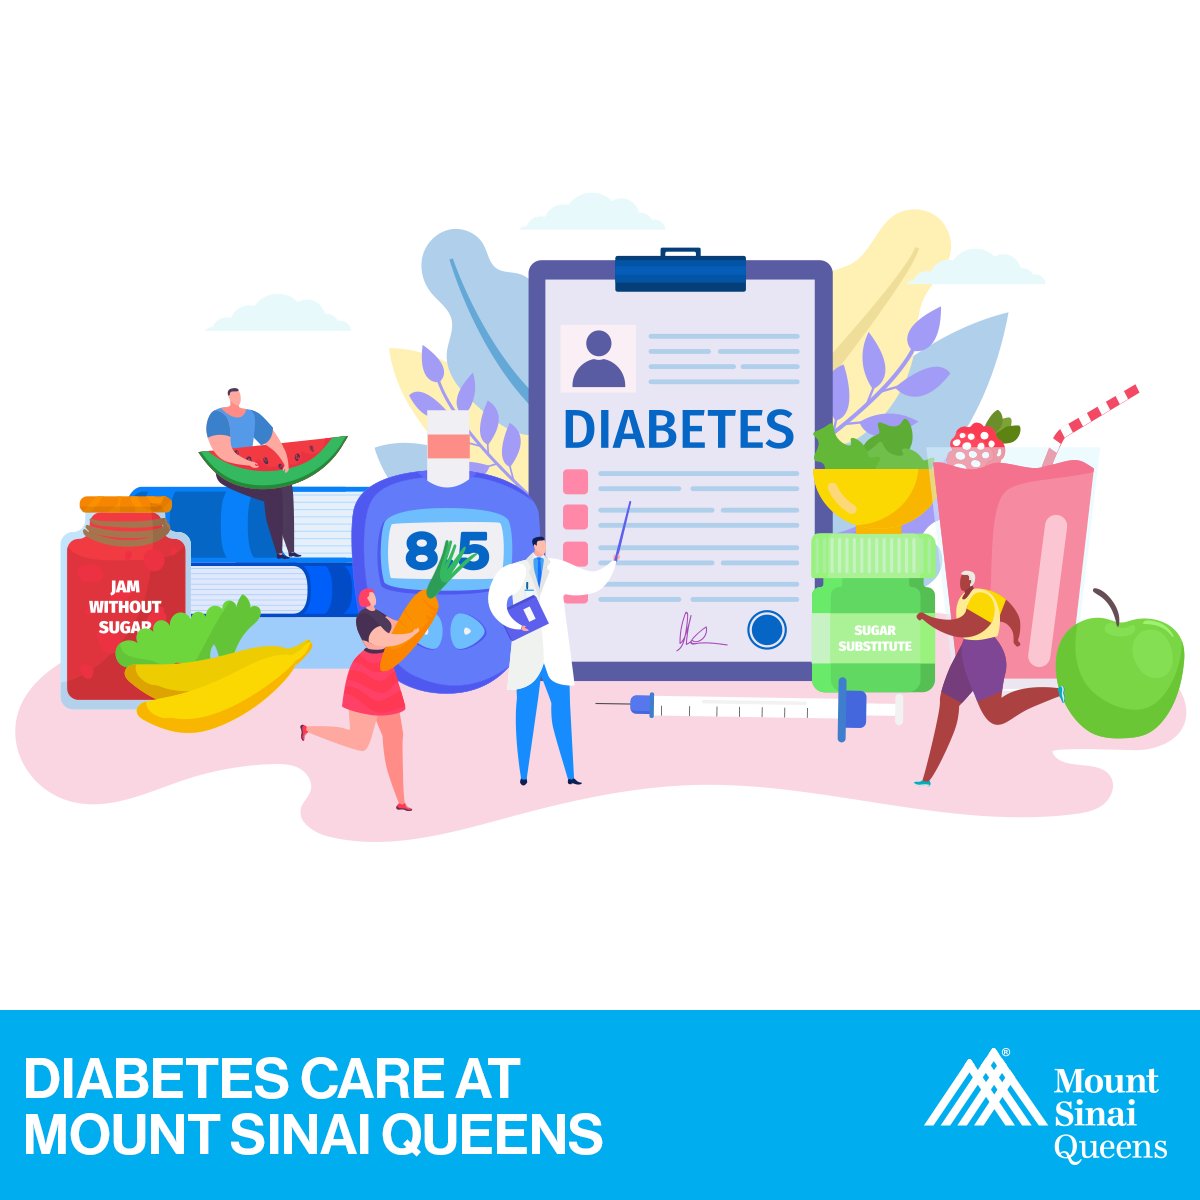 To effectively manage #diabetes, you may need both medical and lifestyle interventions. That’s why we offer on-site diabetes nutrition counseling to teach you and your family how to use insulin & work together to create an individualized treatment program. bit.ly/3DPYmLH